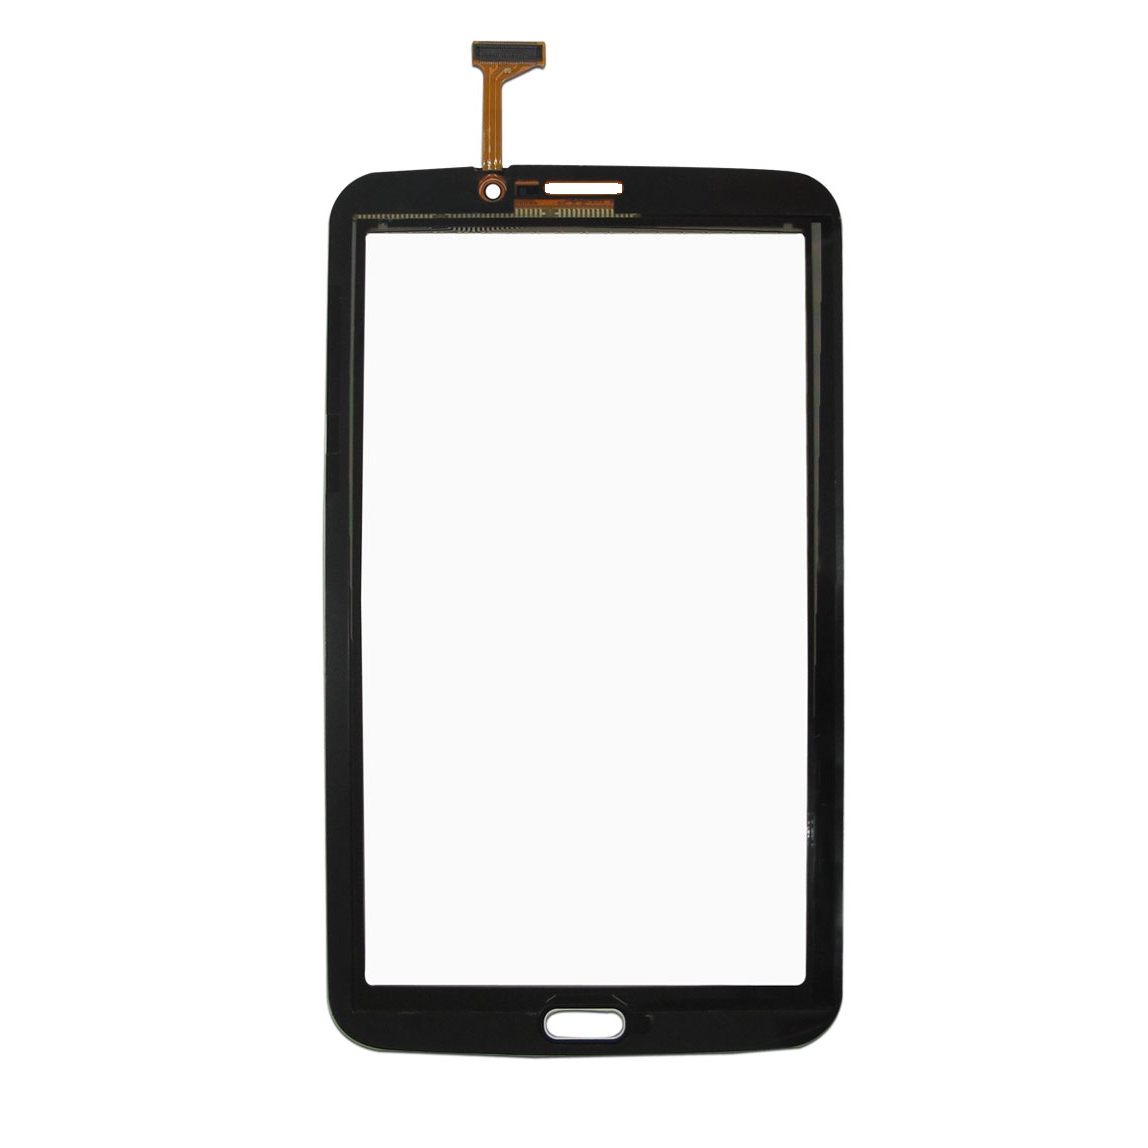 Samsung Galaxy Tab 3 7.0 Front Touch Screen Digitizer - Black for [product_price] - First Help Tech